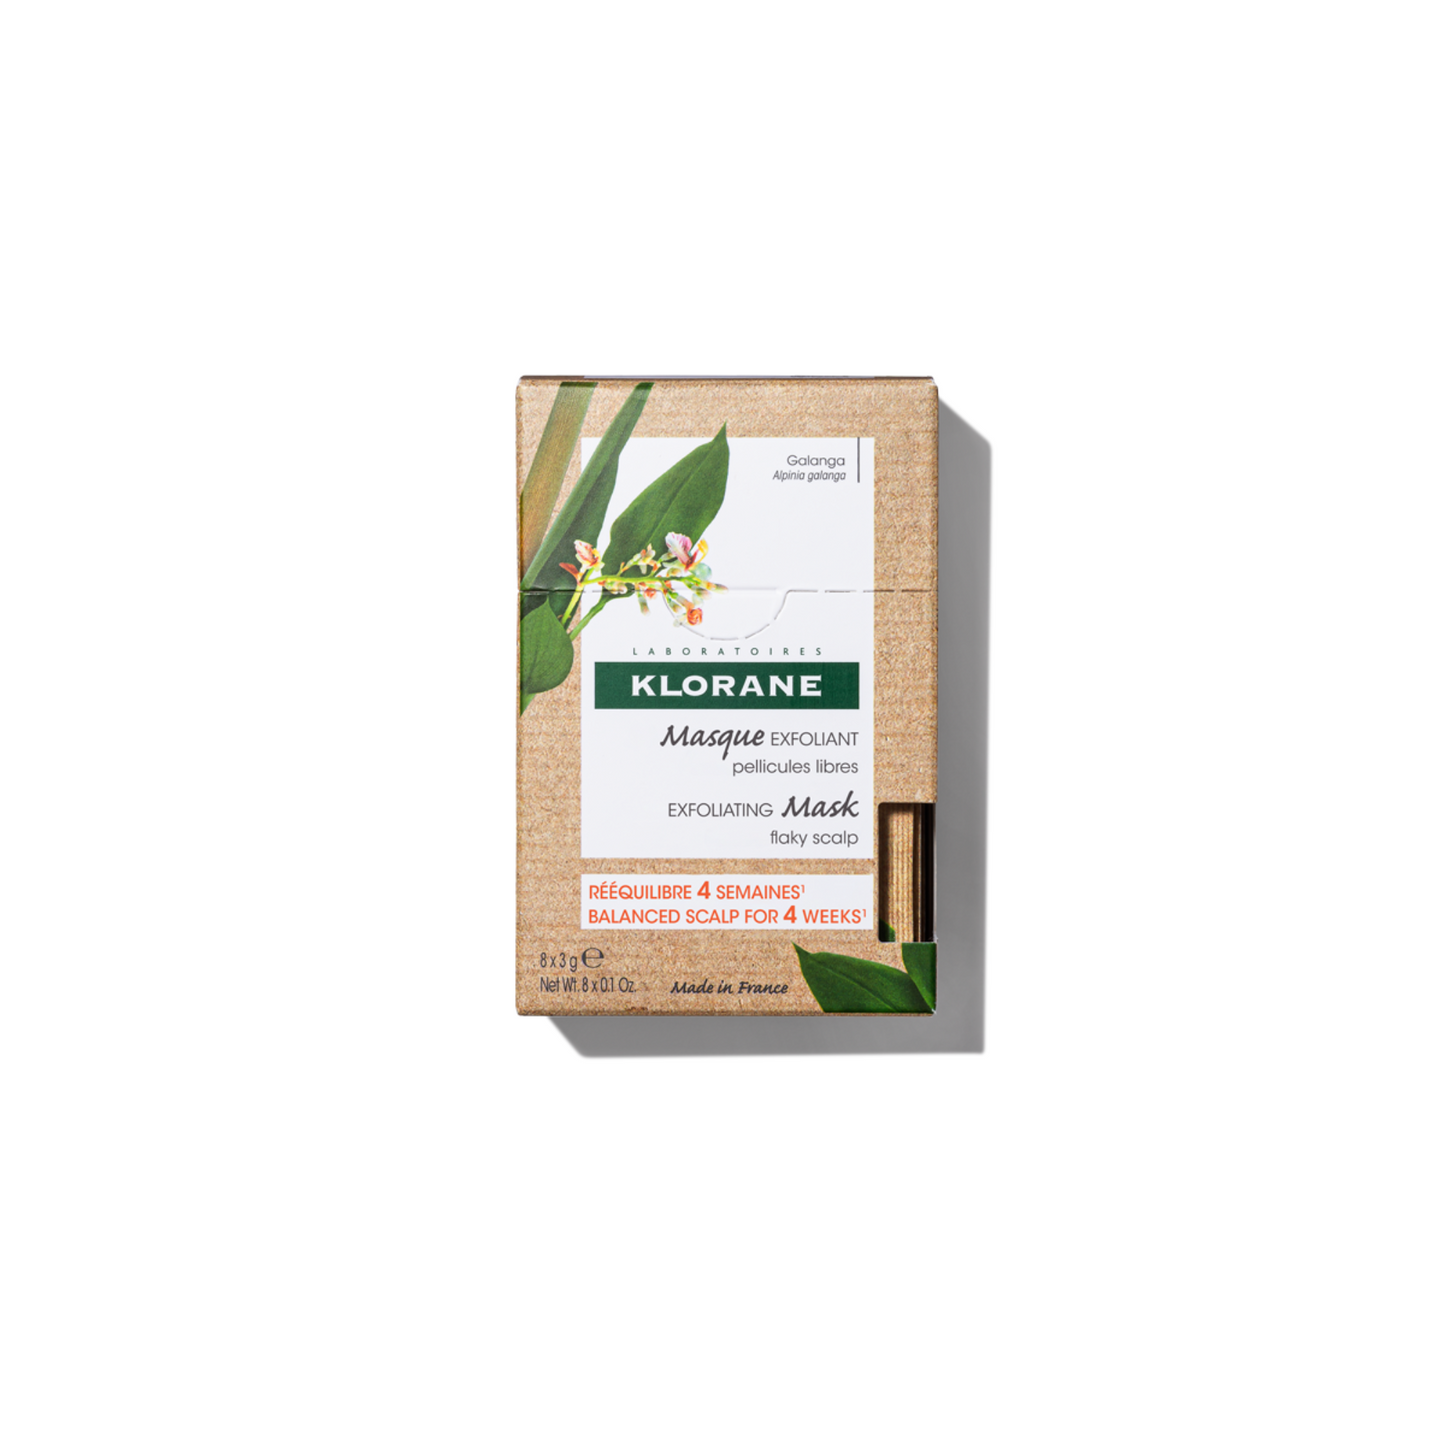 Primary Image of Klorane Galangal 2-in-1 Mask Shampoo (8x3g)